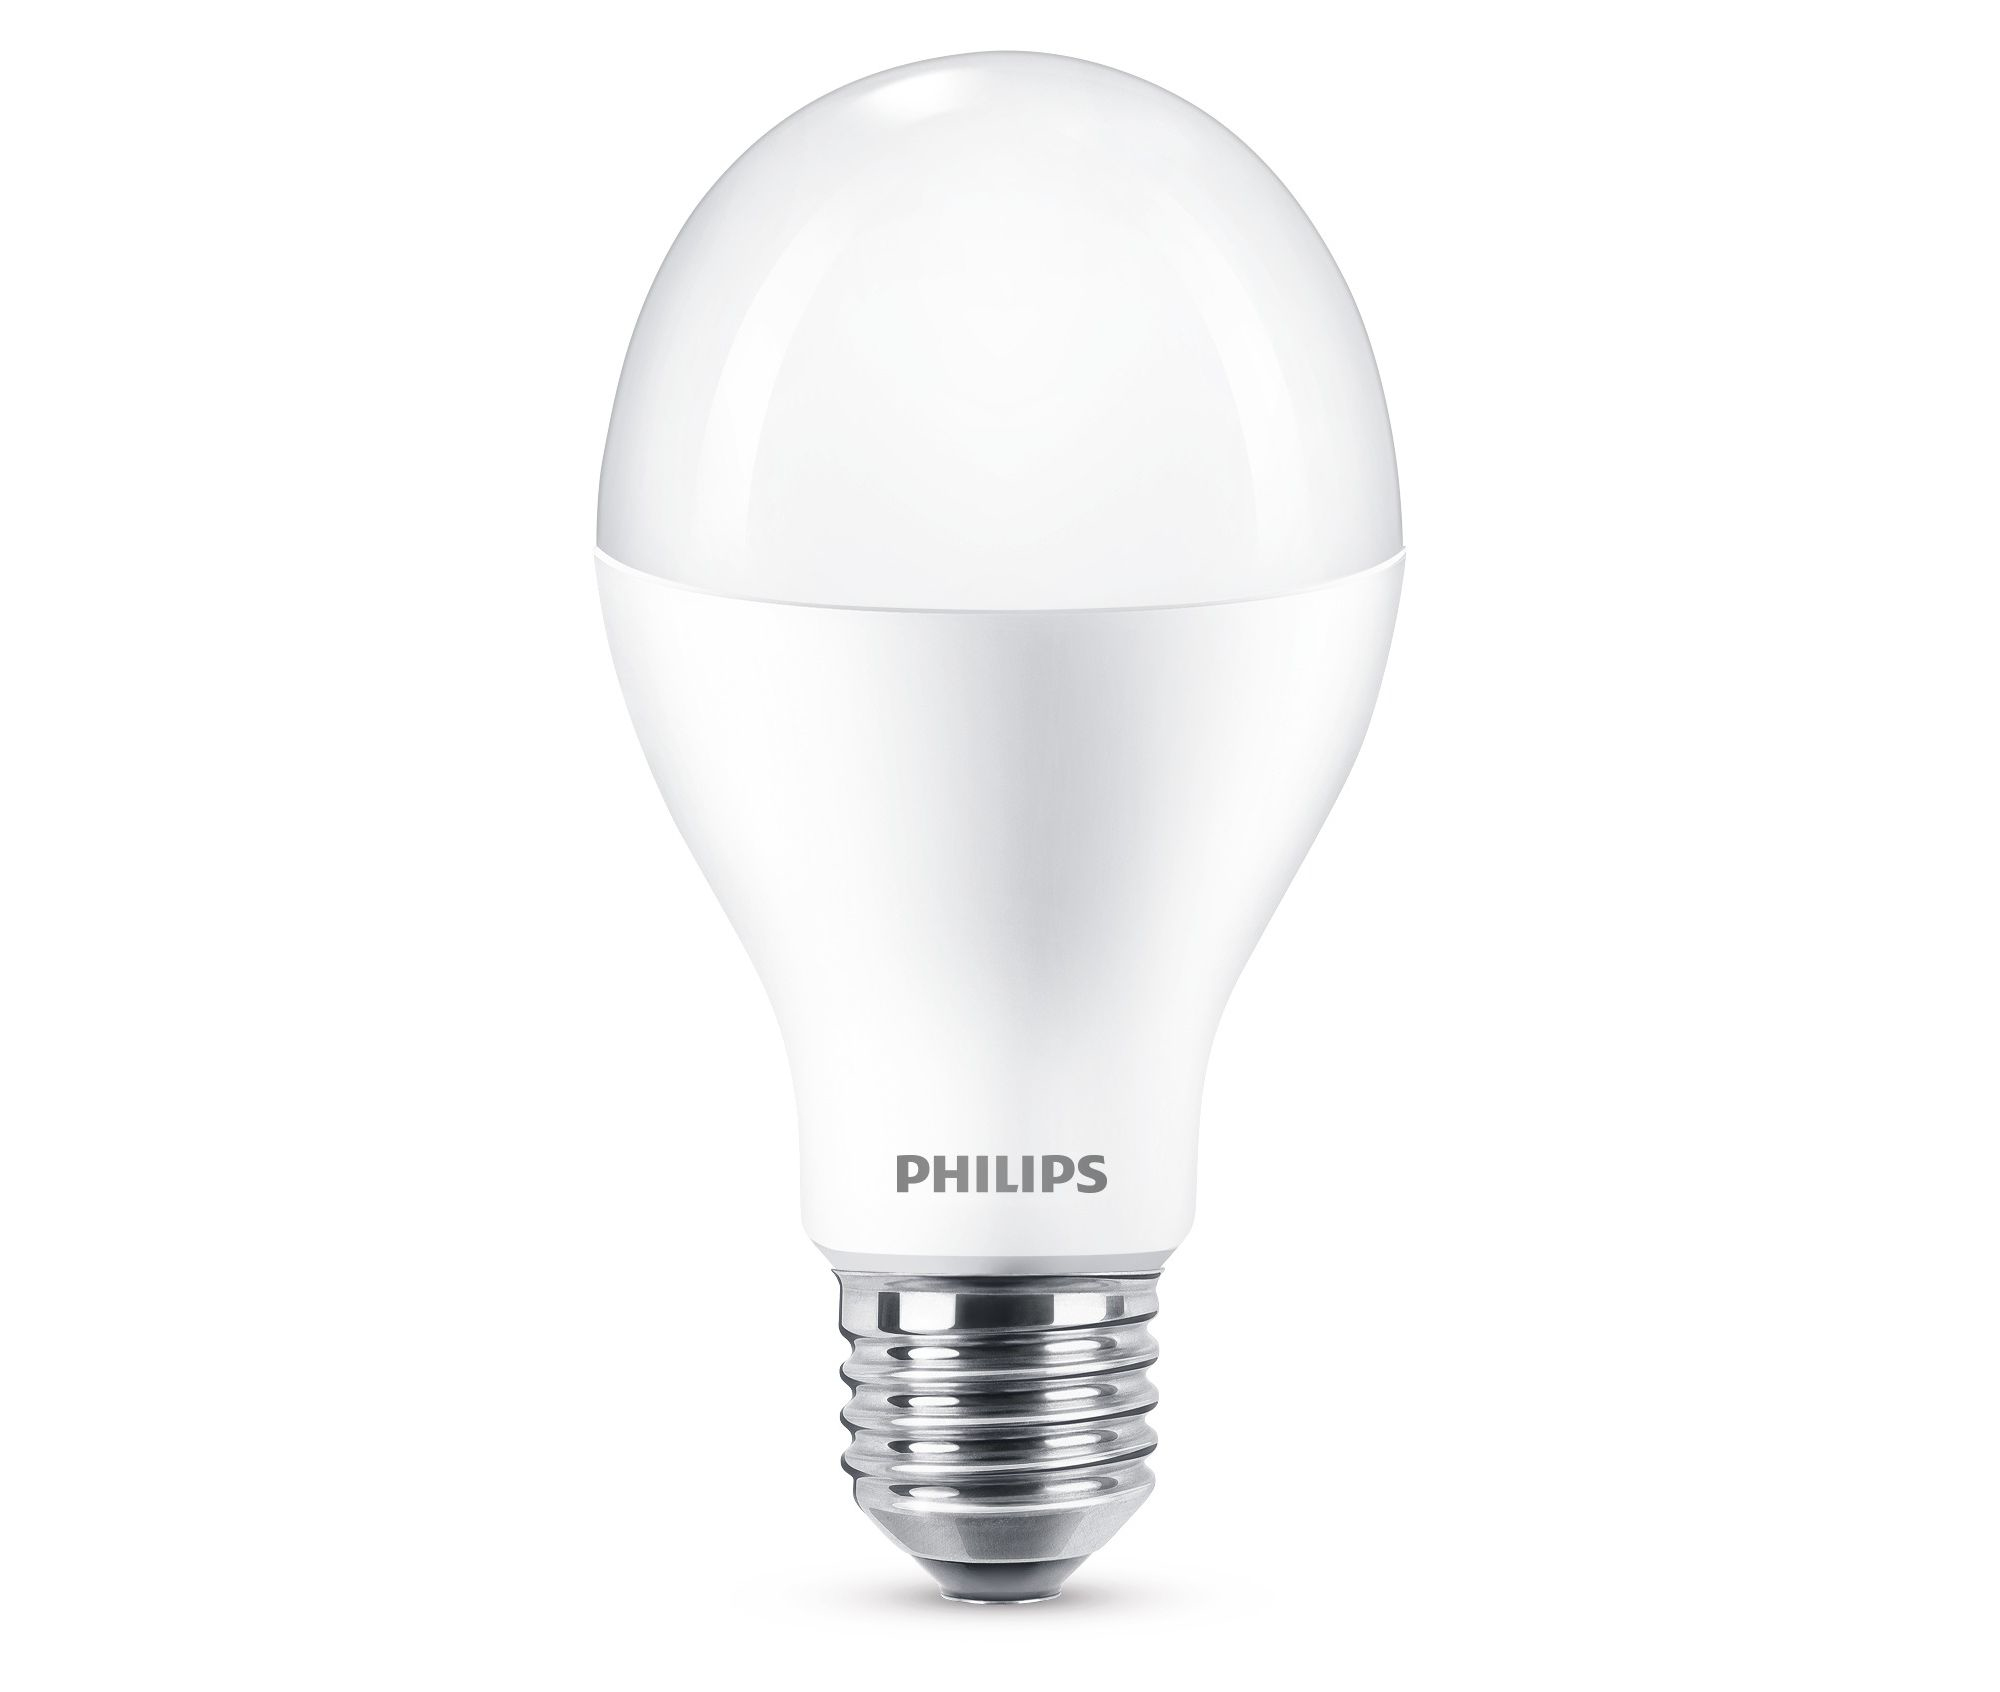 Philips by Signify Lamp